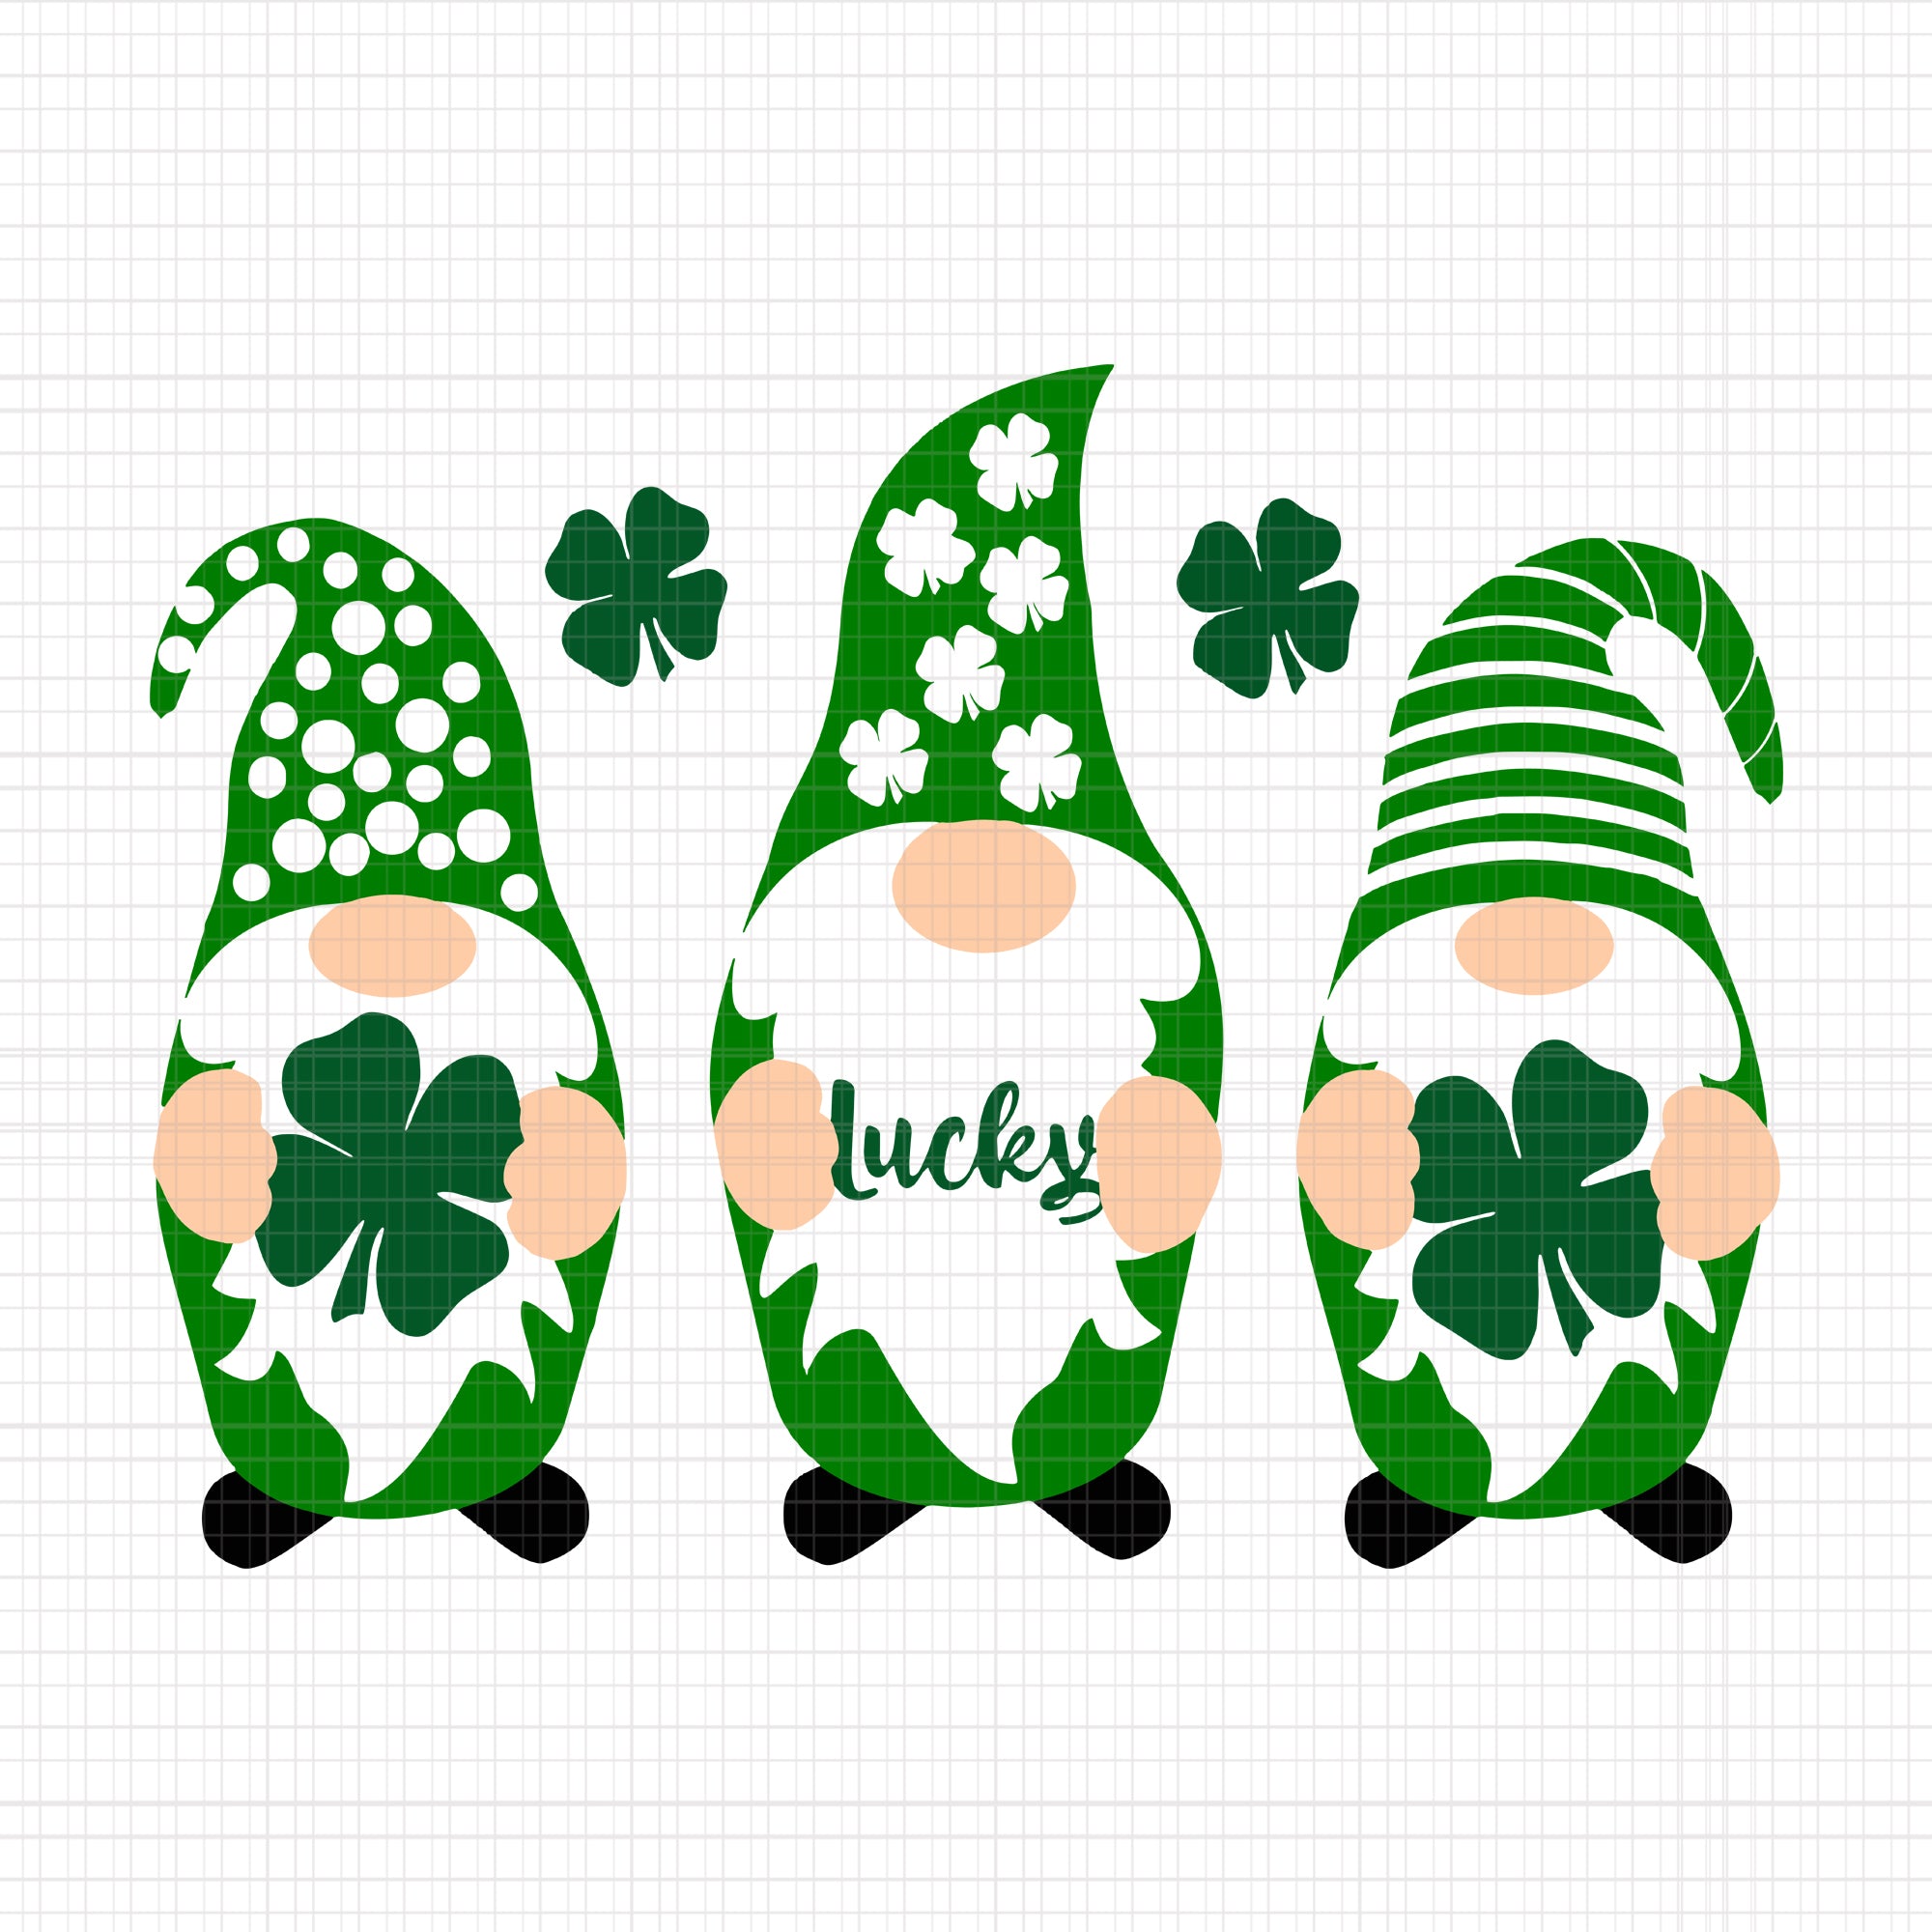 Gnomies patrick’s day svg , lucky gnome svg, gnomies patrick’s day png, gnomies patrick’s day , shamrock svg, irish svg, irish png,st patrick day, patrick day svg, gnomies irish svg, gnomies irish